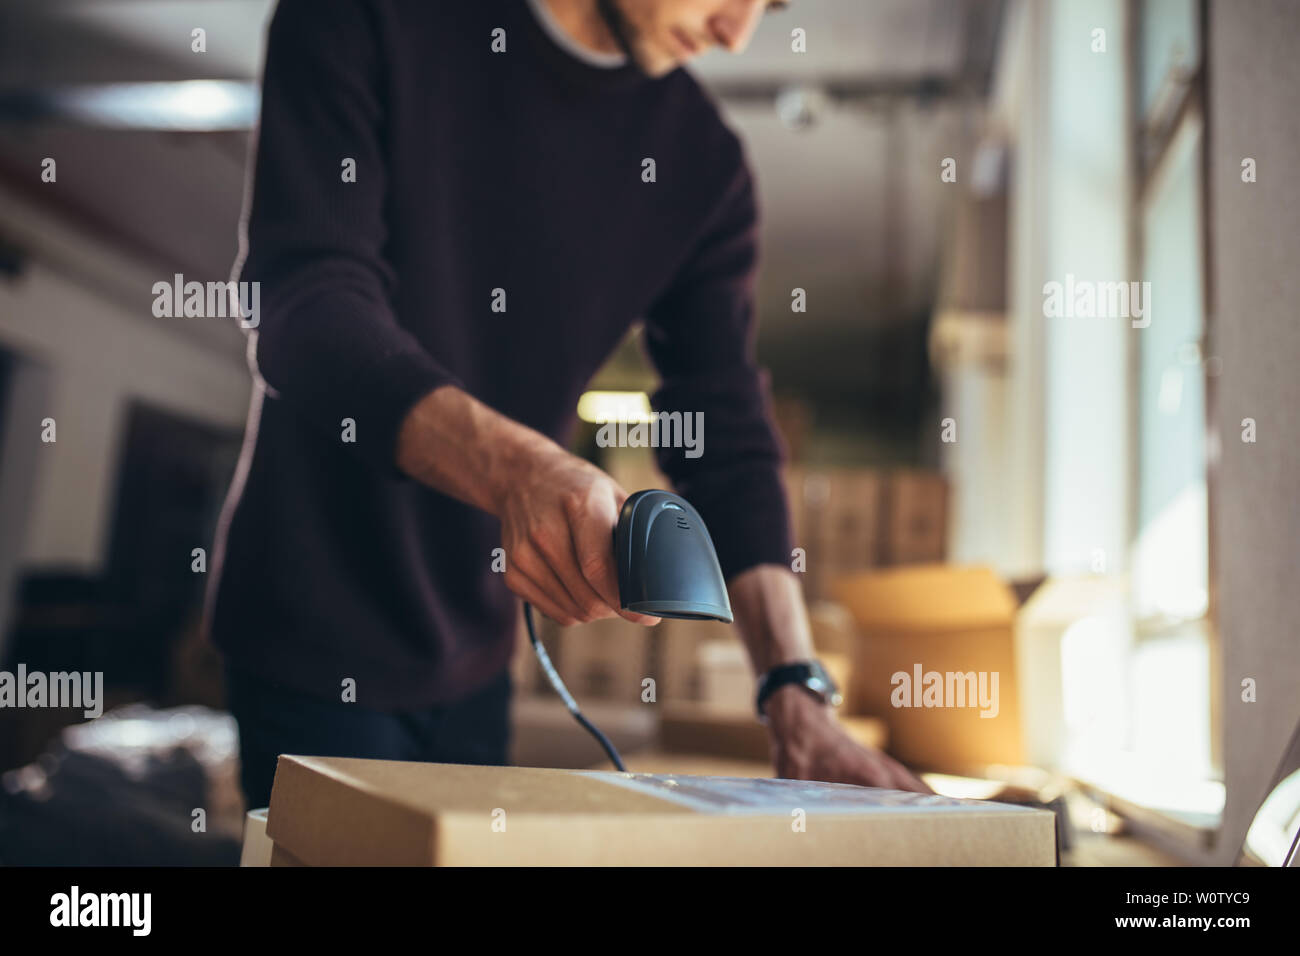 Online seller working at office. Man working on online orders, scanning the parcel before the shipping to the customer. Stock Photo